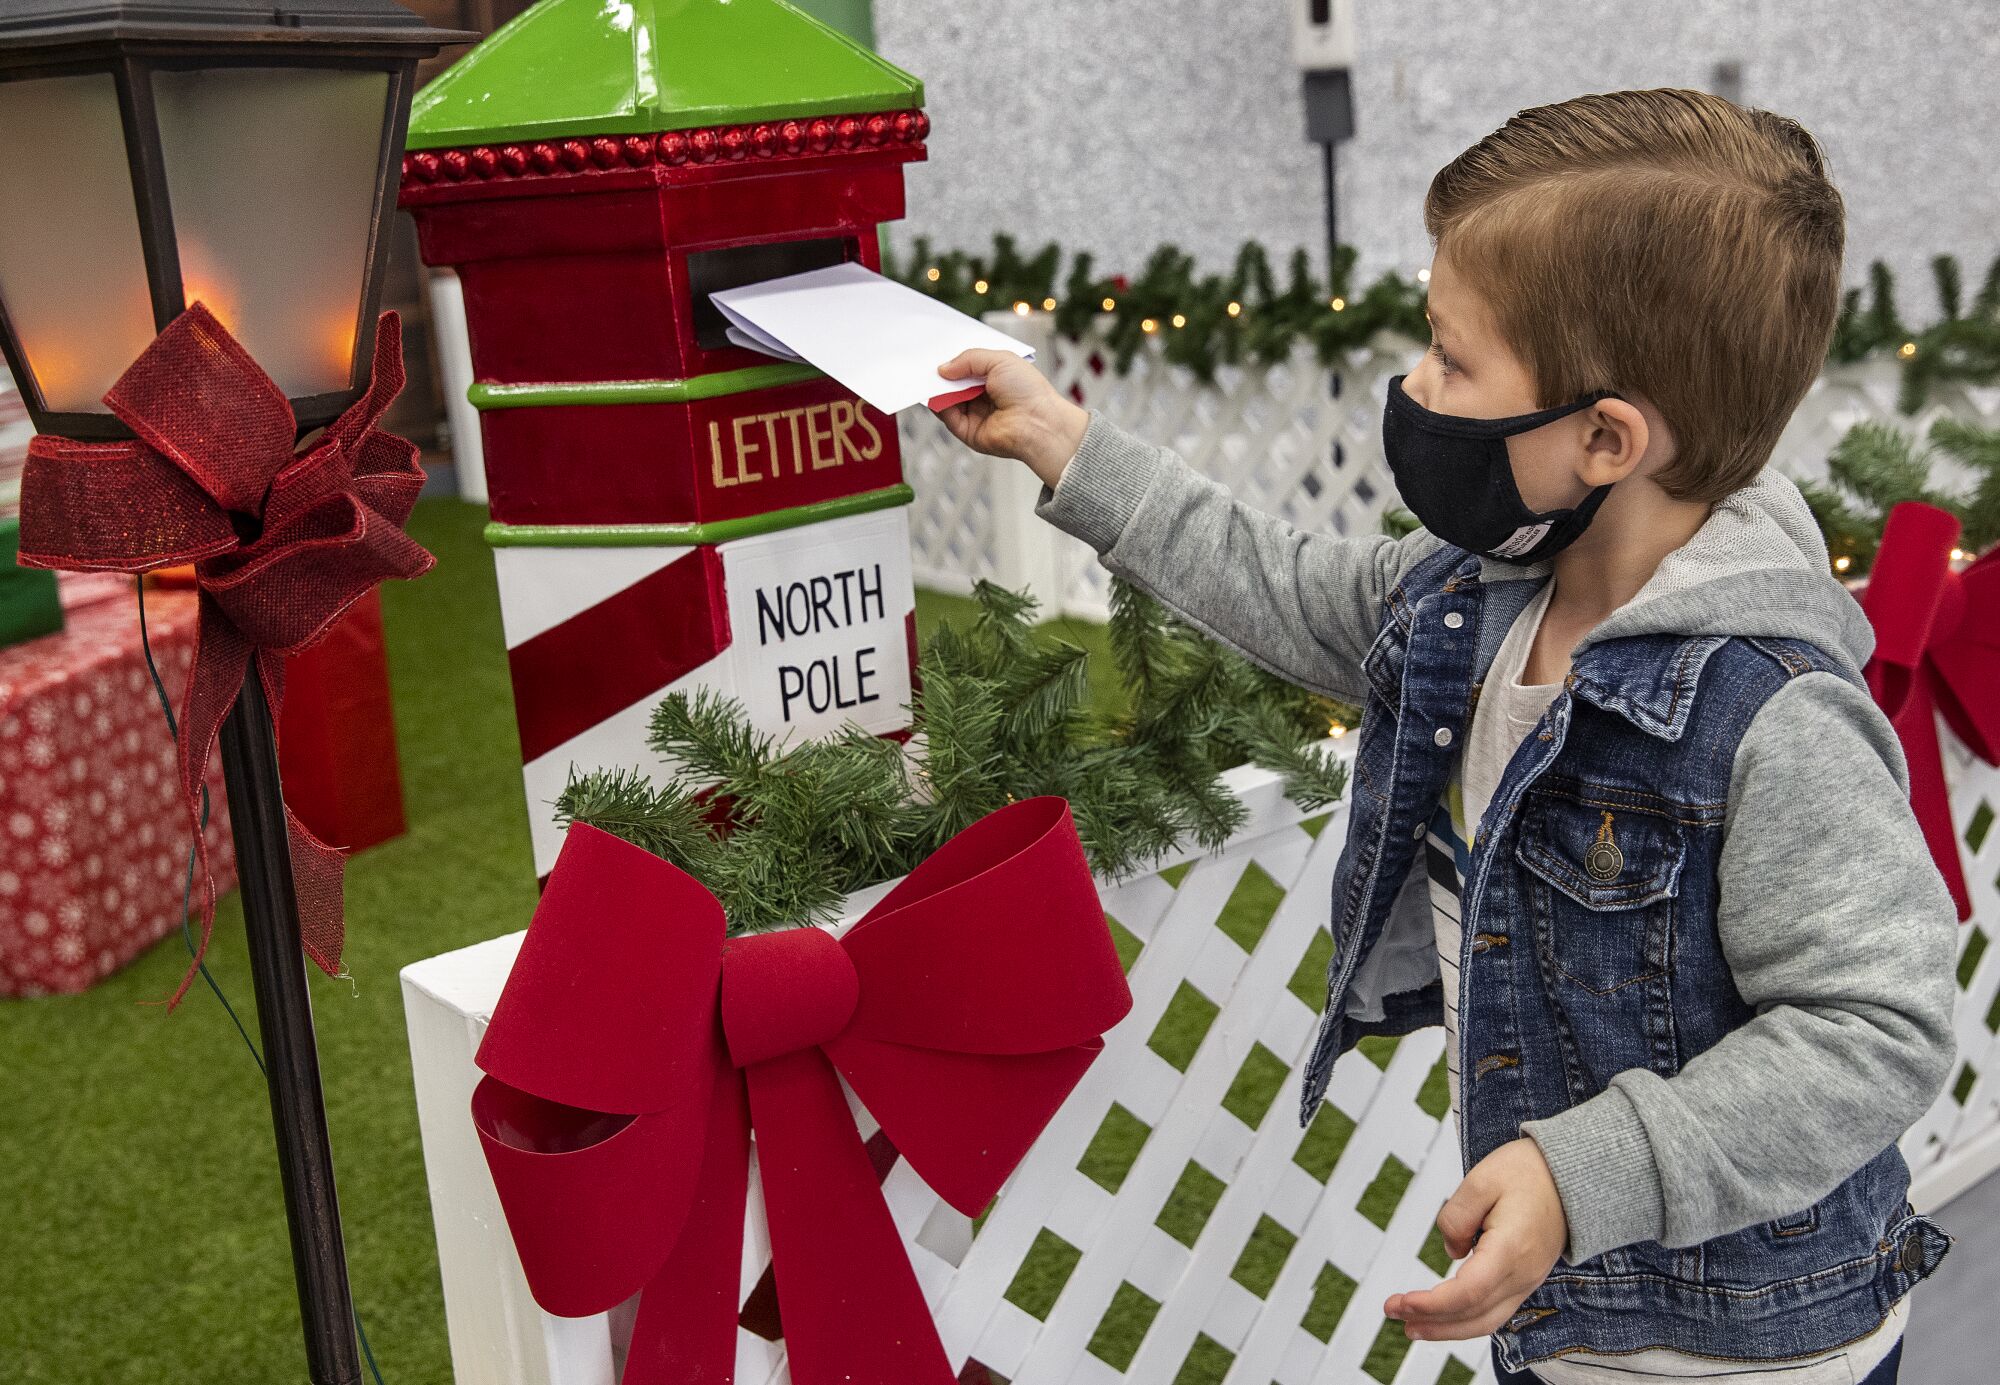 Daxton Tait, 4, mails a letter to Santa Claus